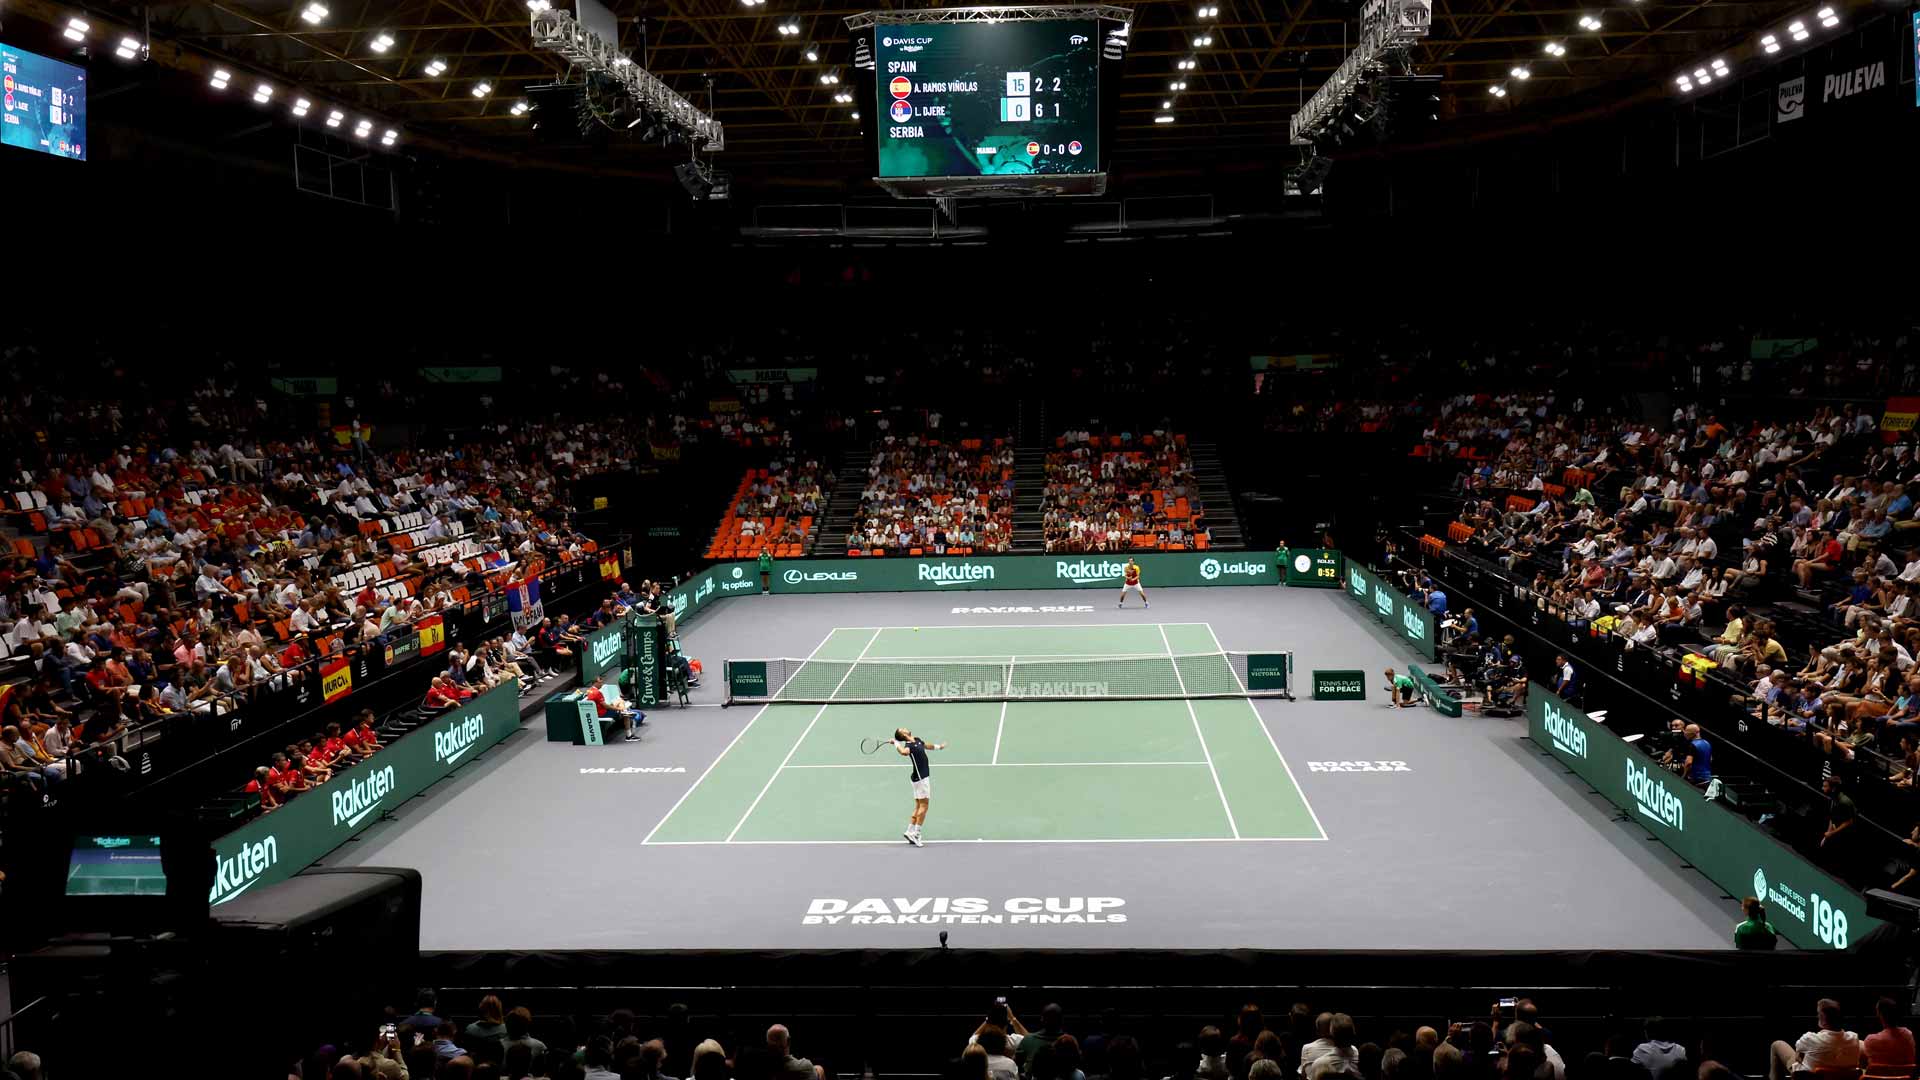 Valencia, Spain returns as a host city for the 2023 Davis Cup Finals Group Stage.